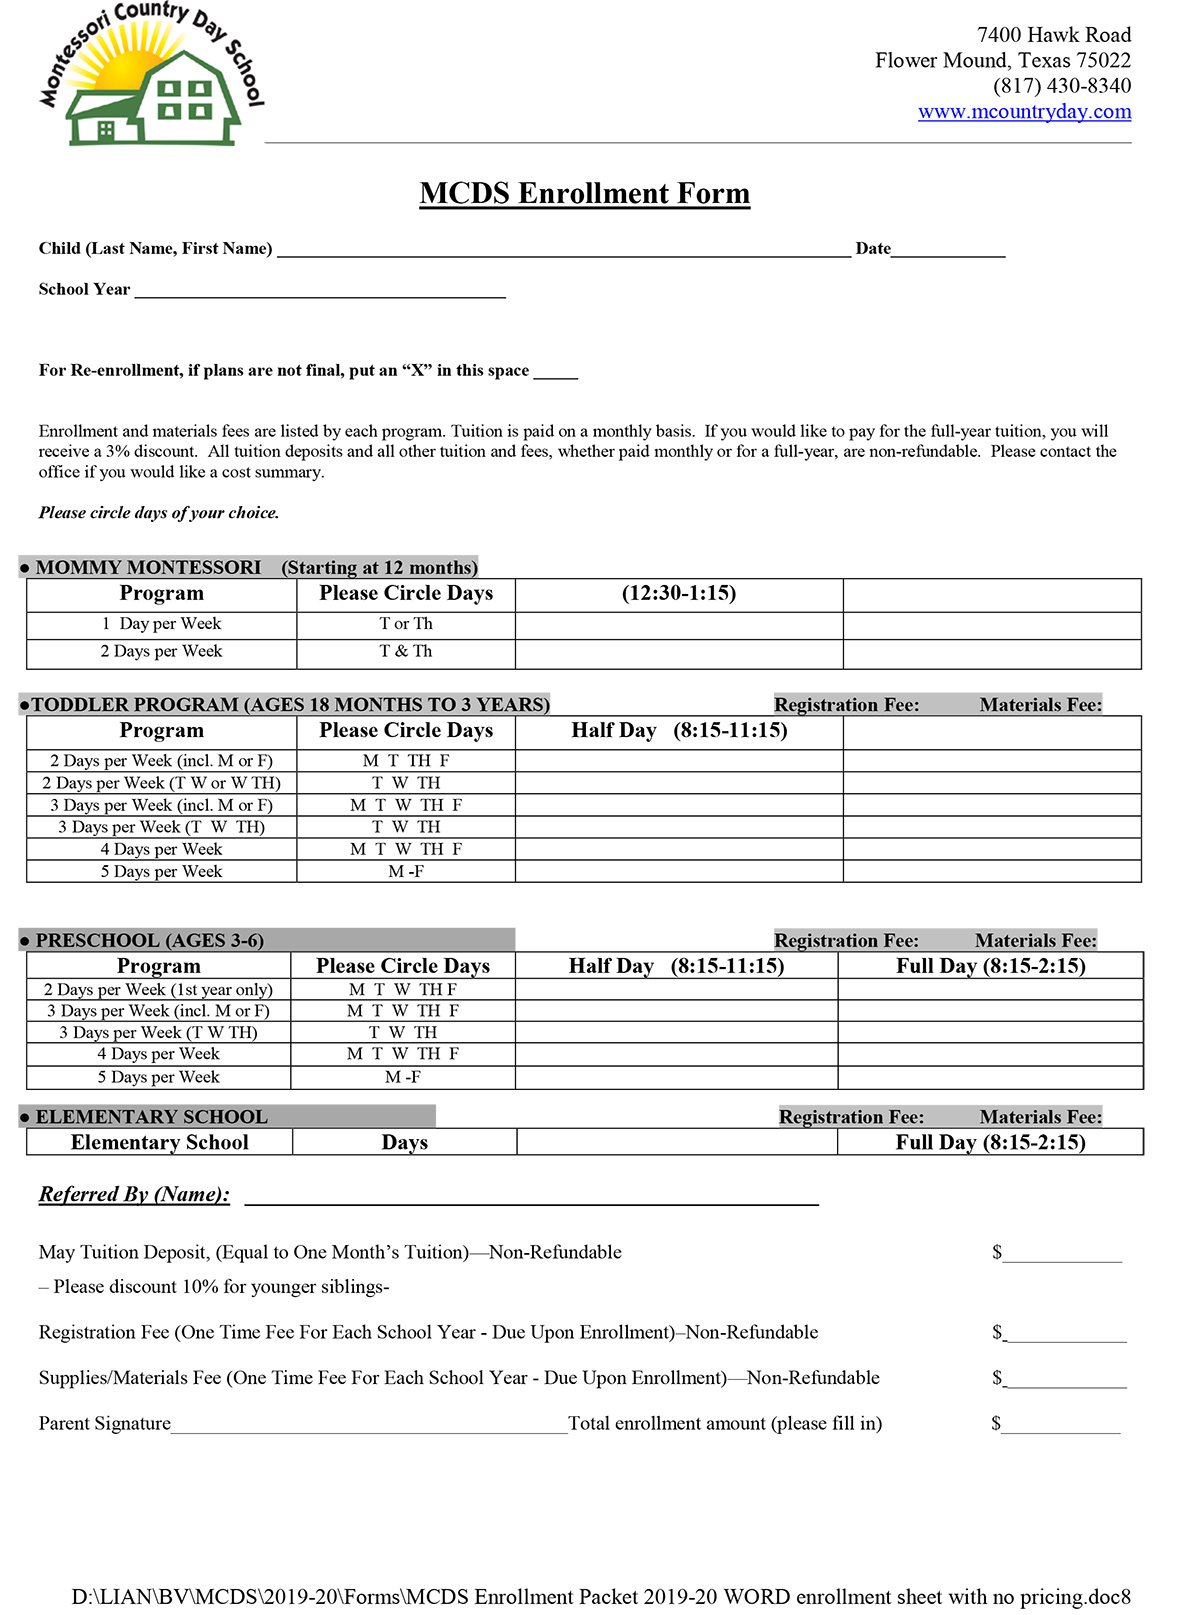 2019-20 Enrollment Sheet with No Pricing